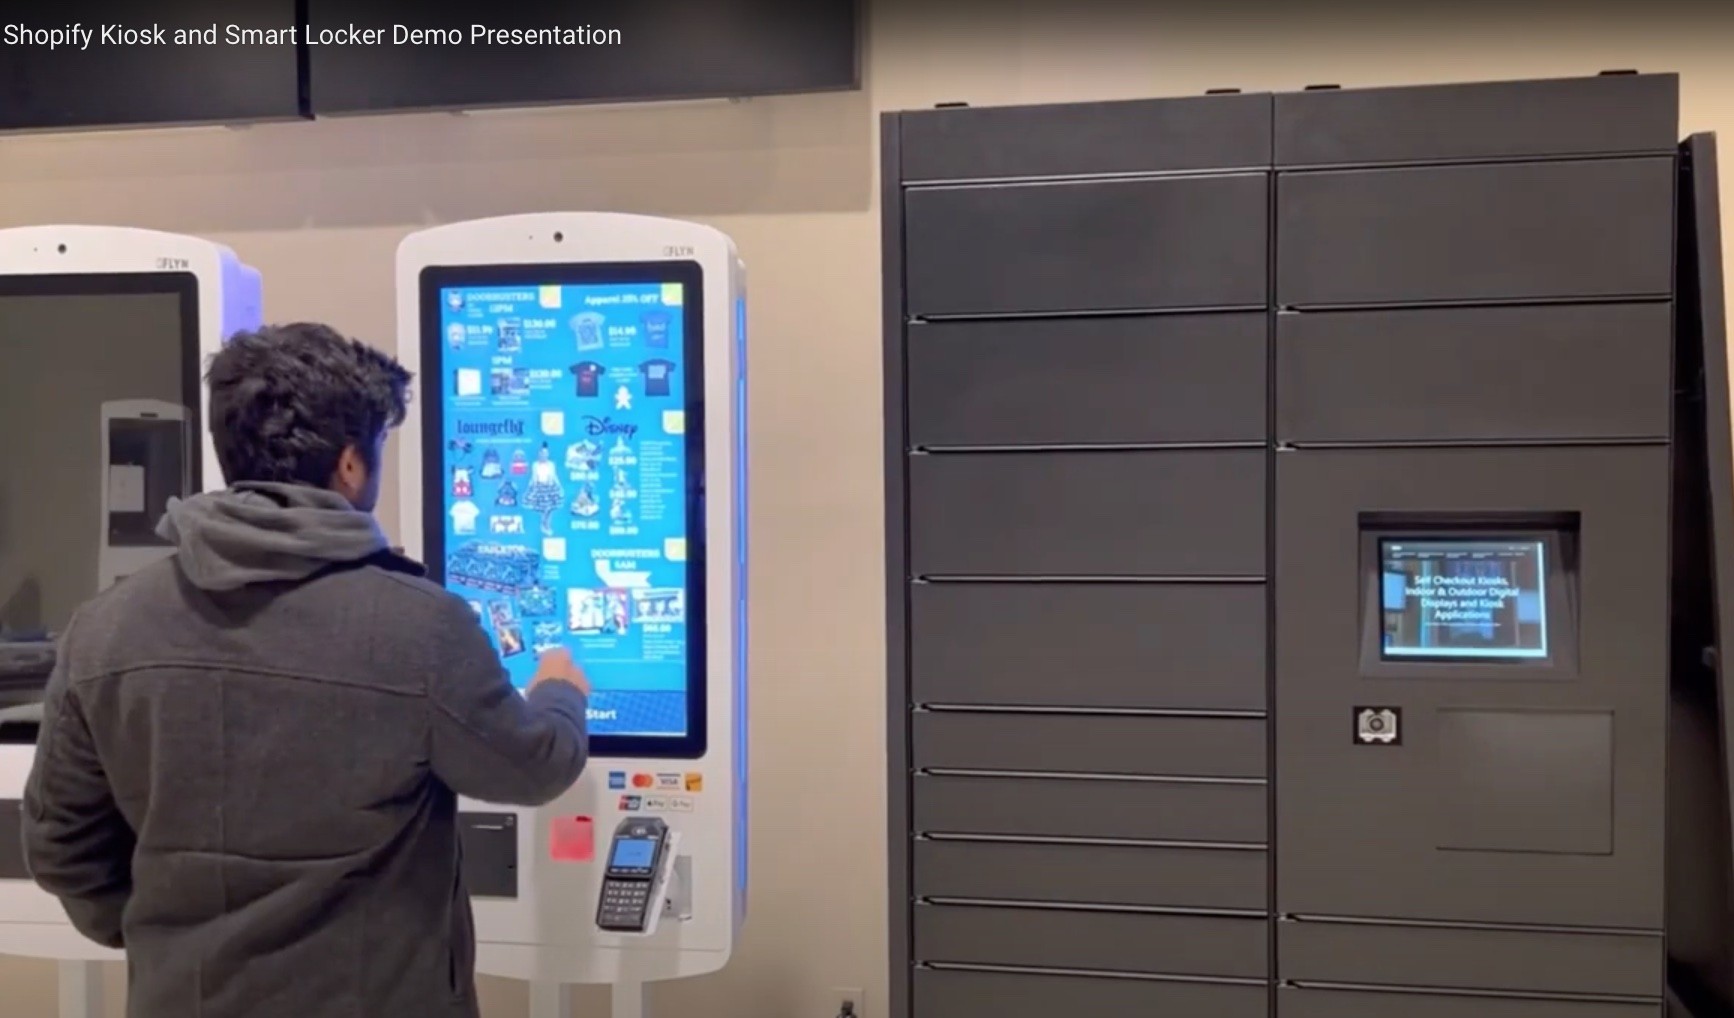 Revolutionizing Retail: Eflyn's Exclusive Smart Locker Solution for Shopify Retailers